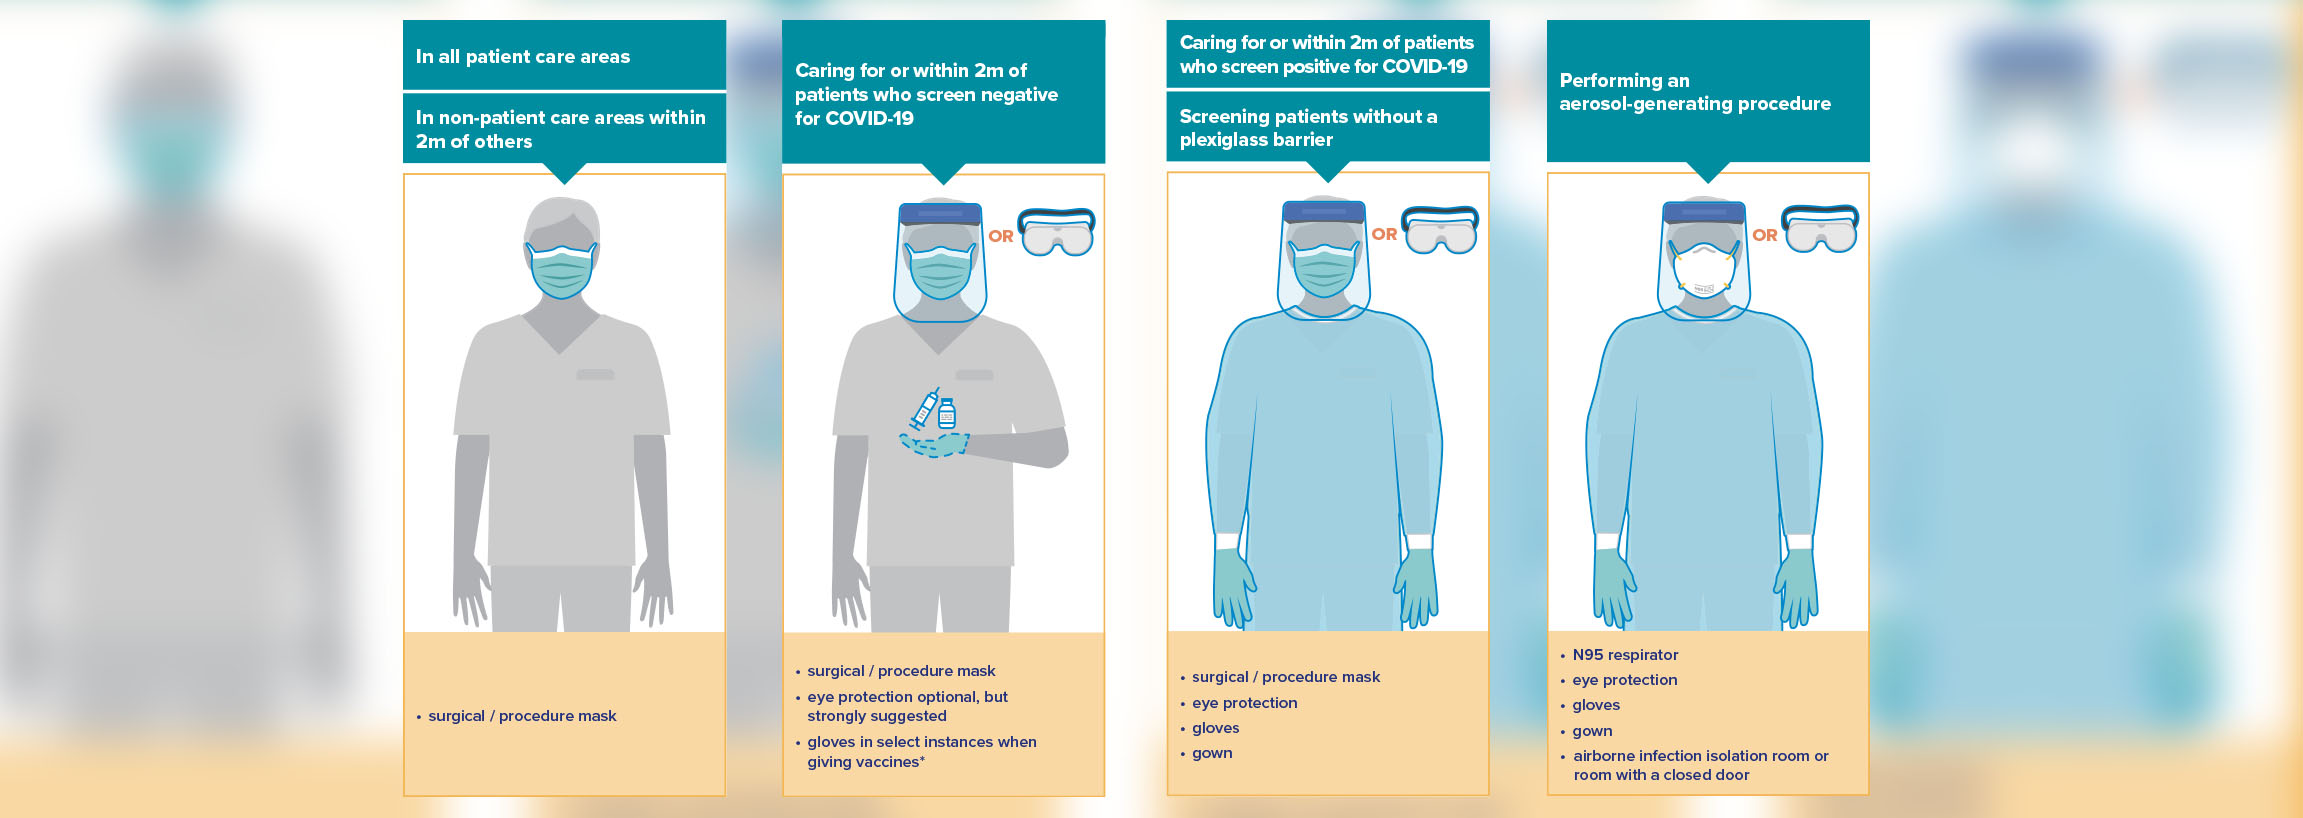 OMA poster depicts what personal protective equipment to use in community practice